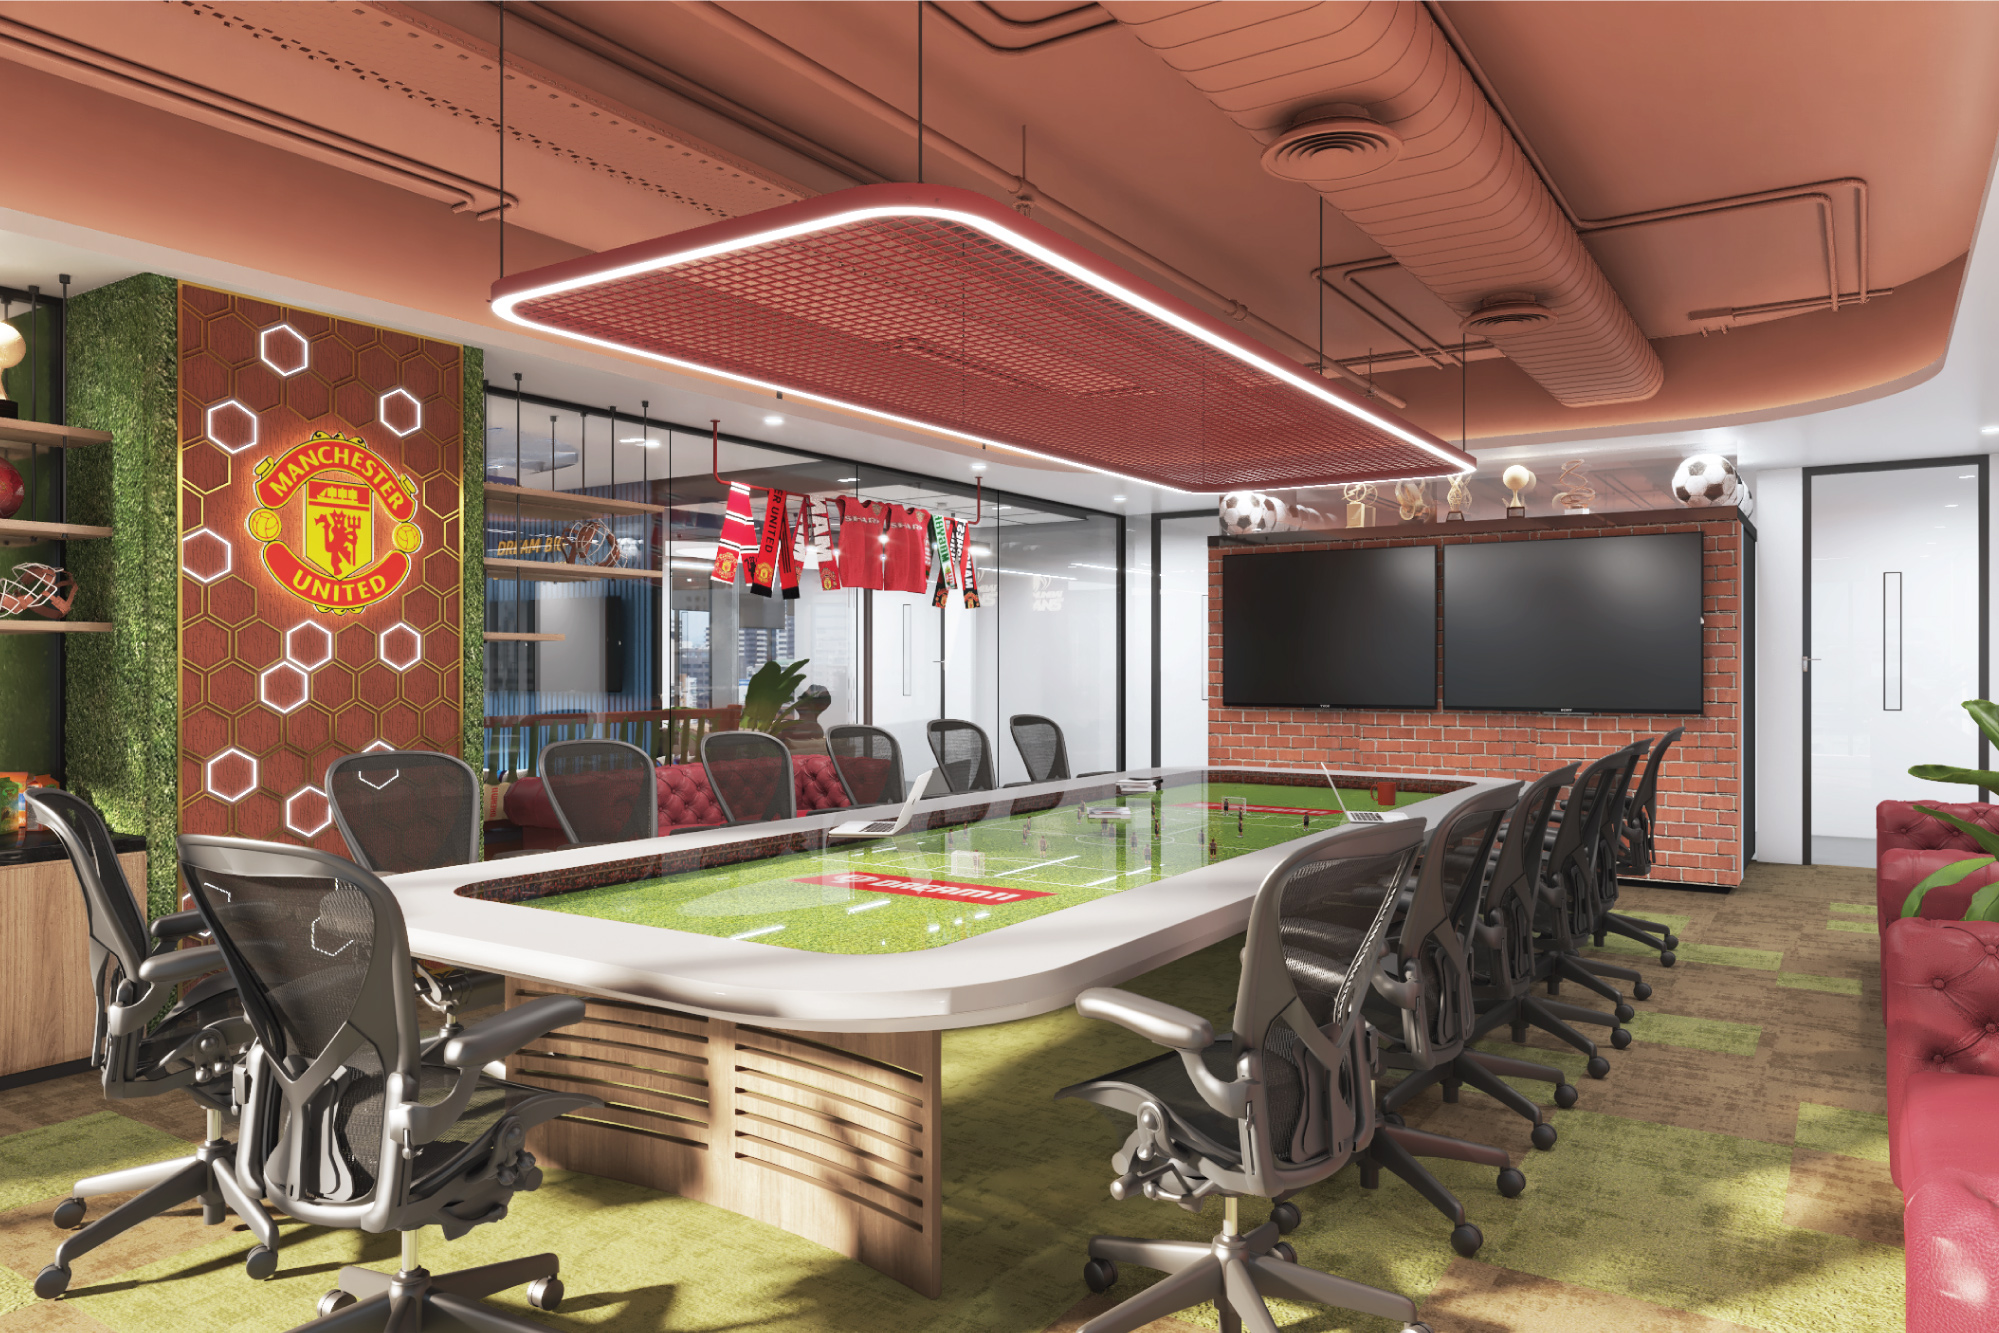 Dream11 headquarter - Workplace design driven by the brand's purpose, mission and values